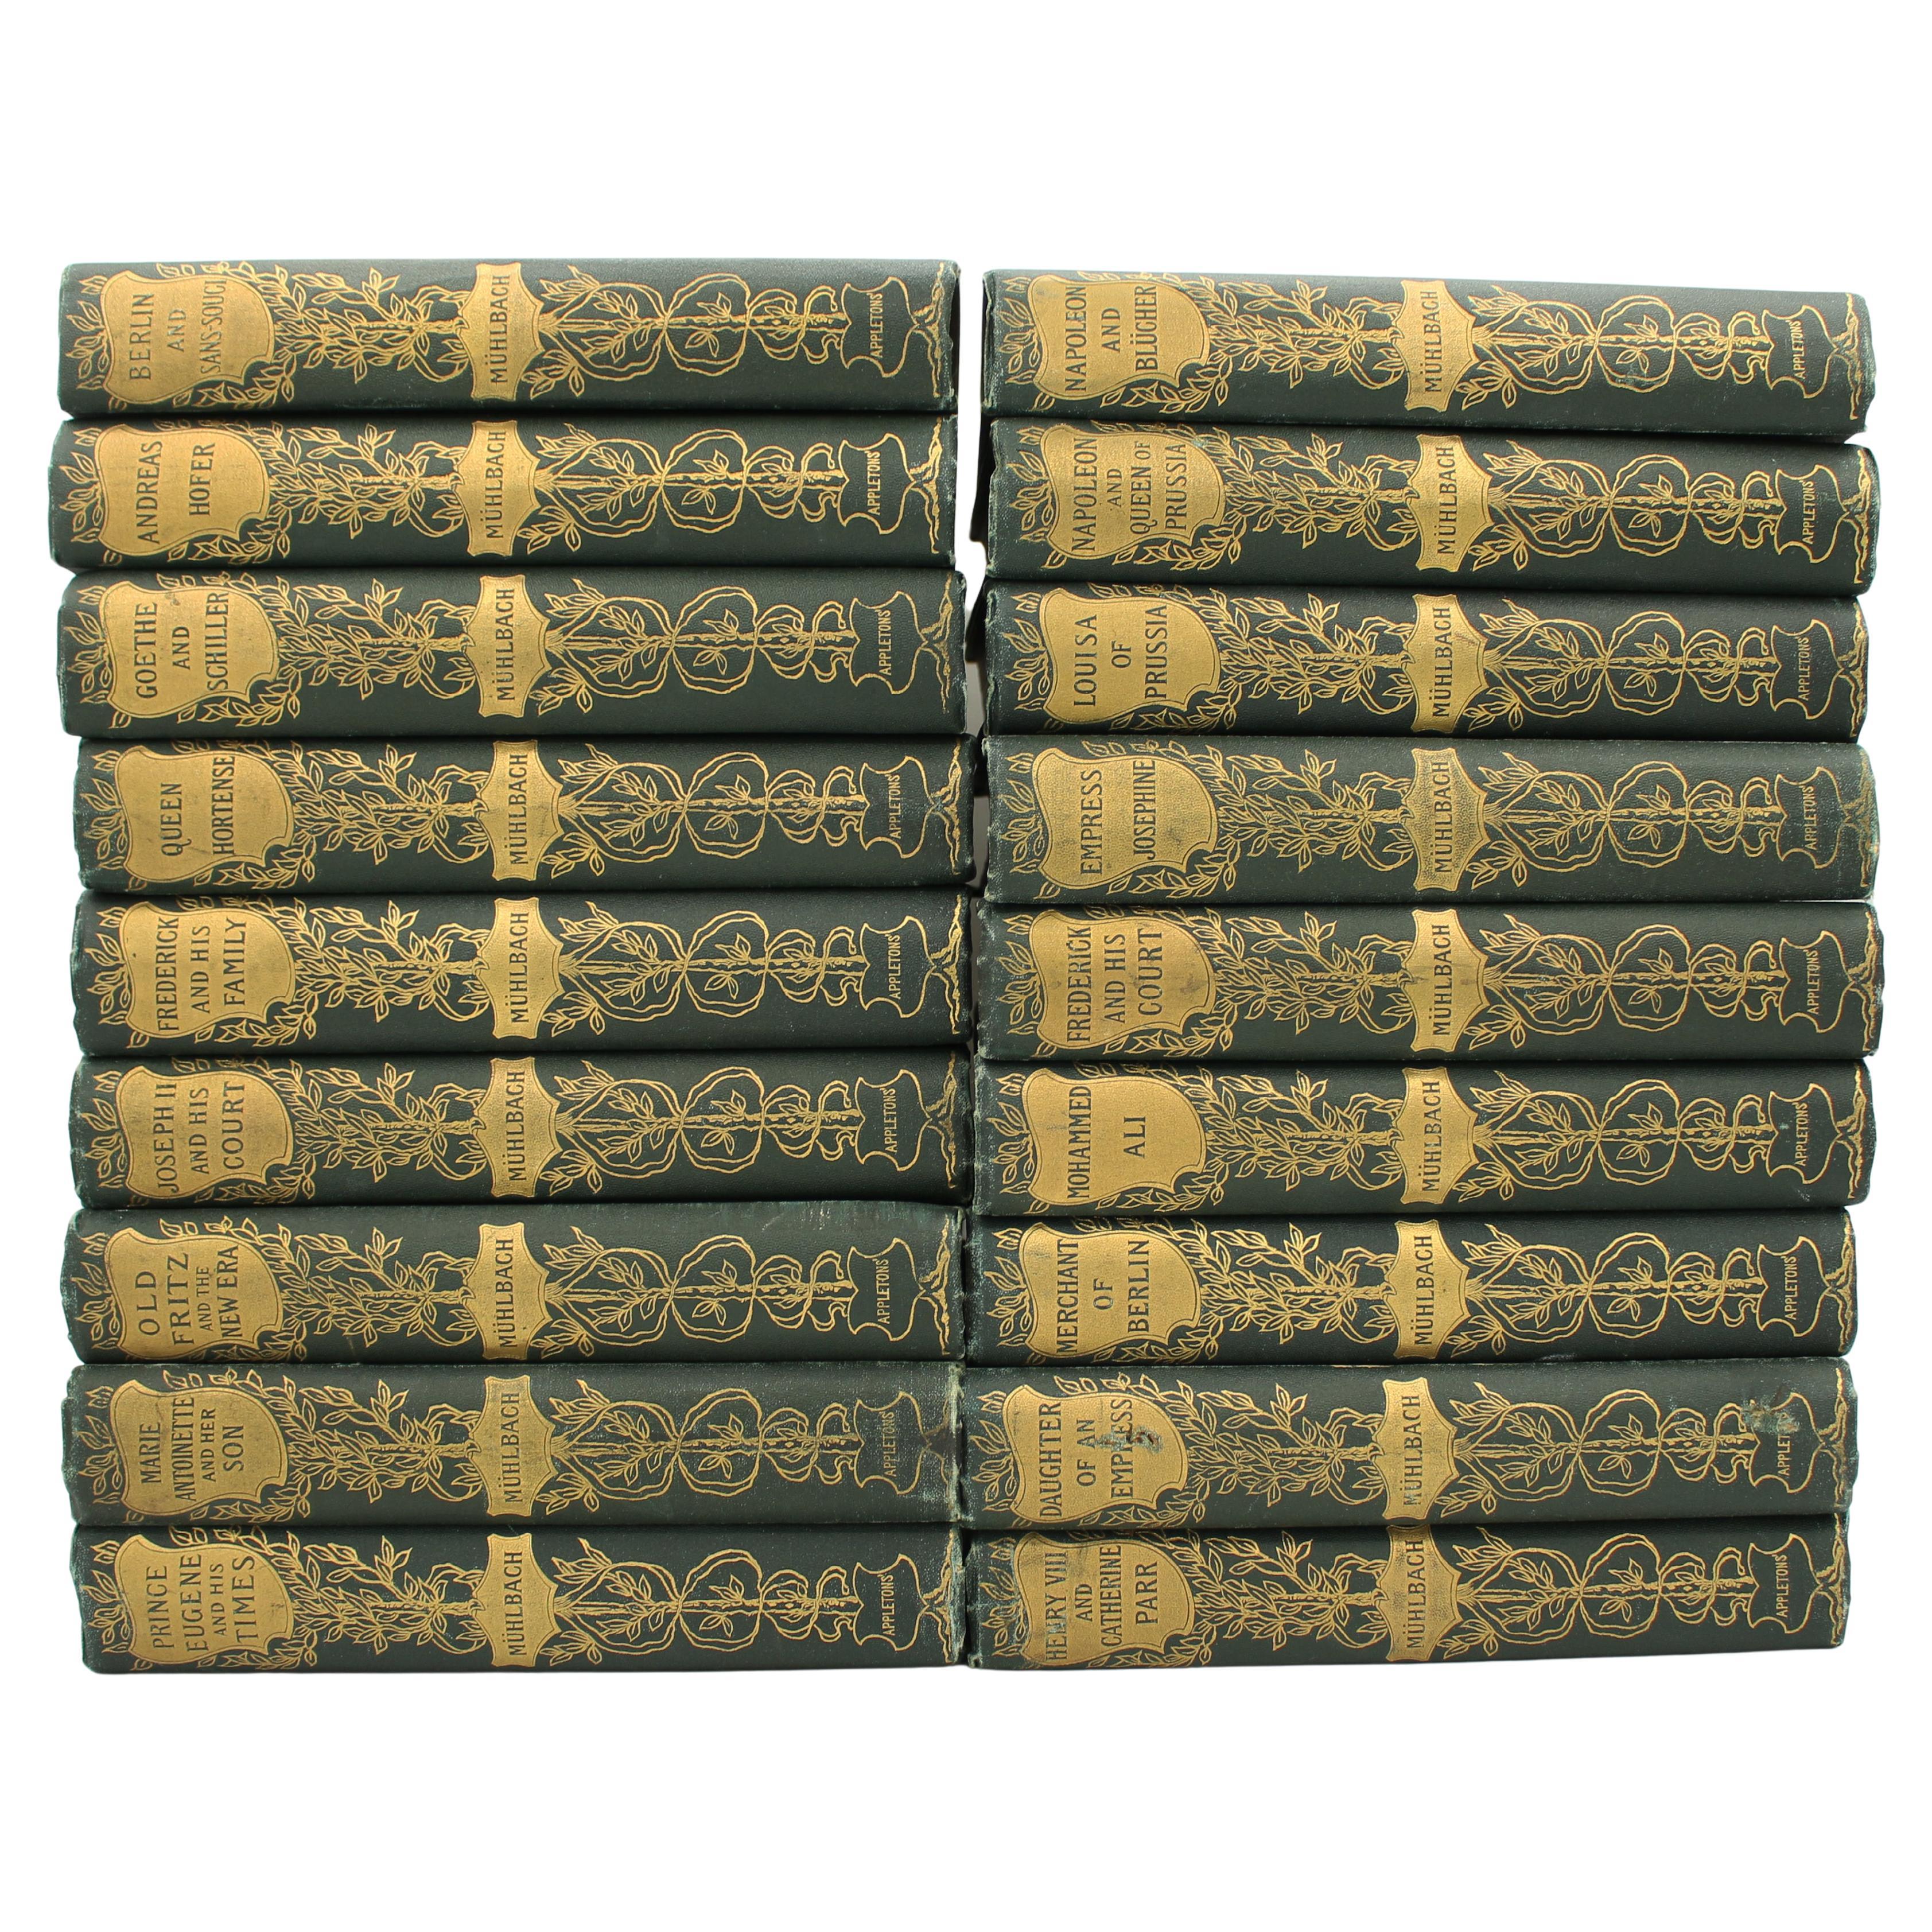 Late 19th Century Hardcover Books by Luise Mülbach - Set of 18